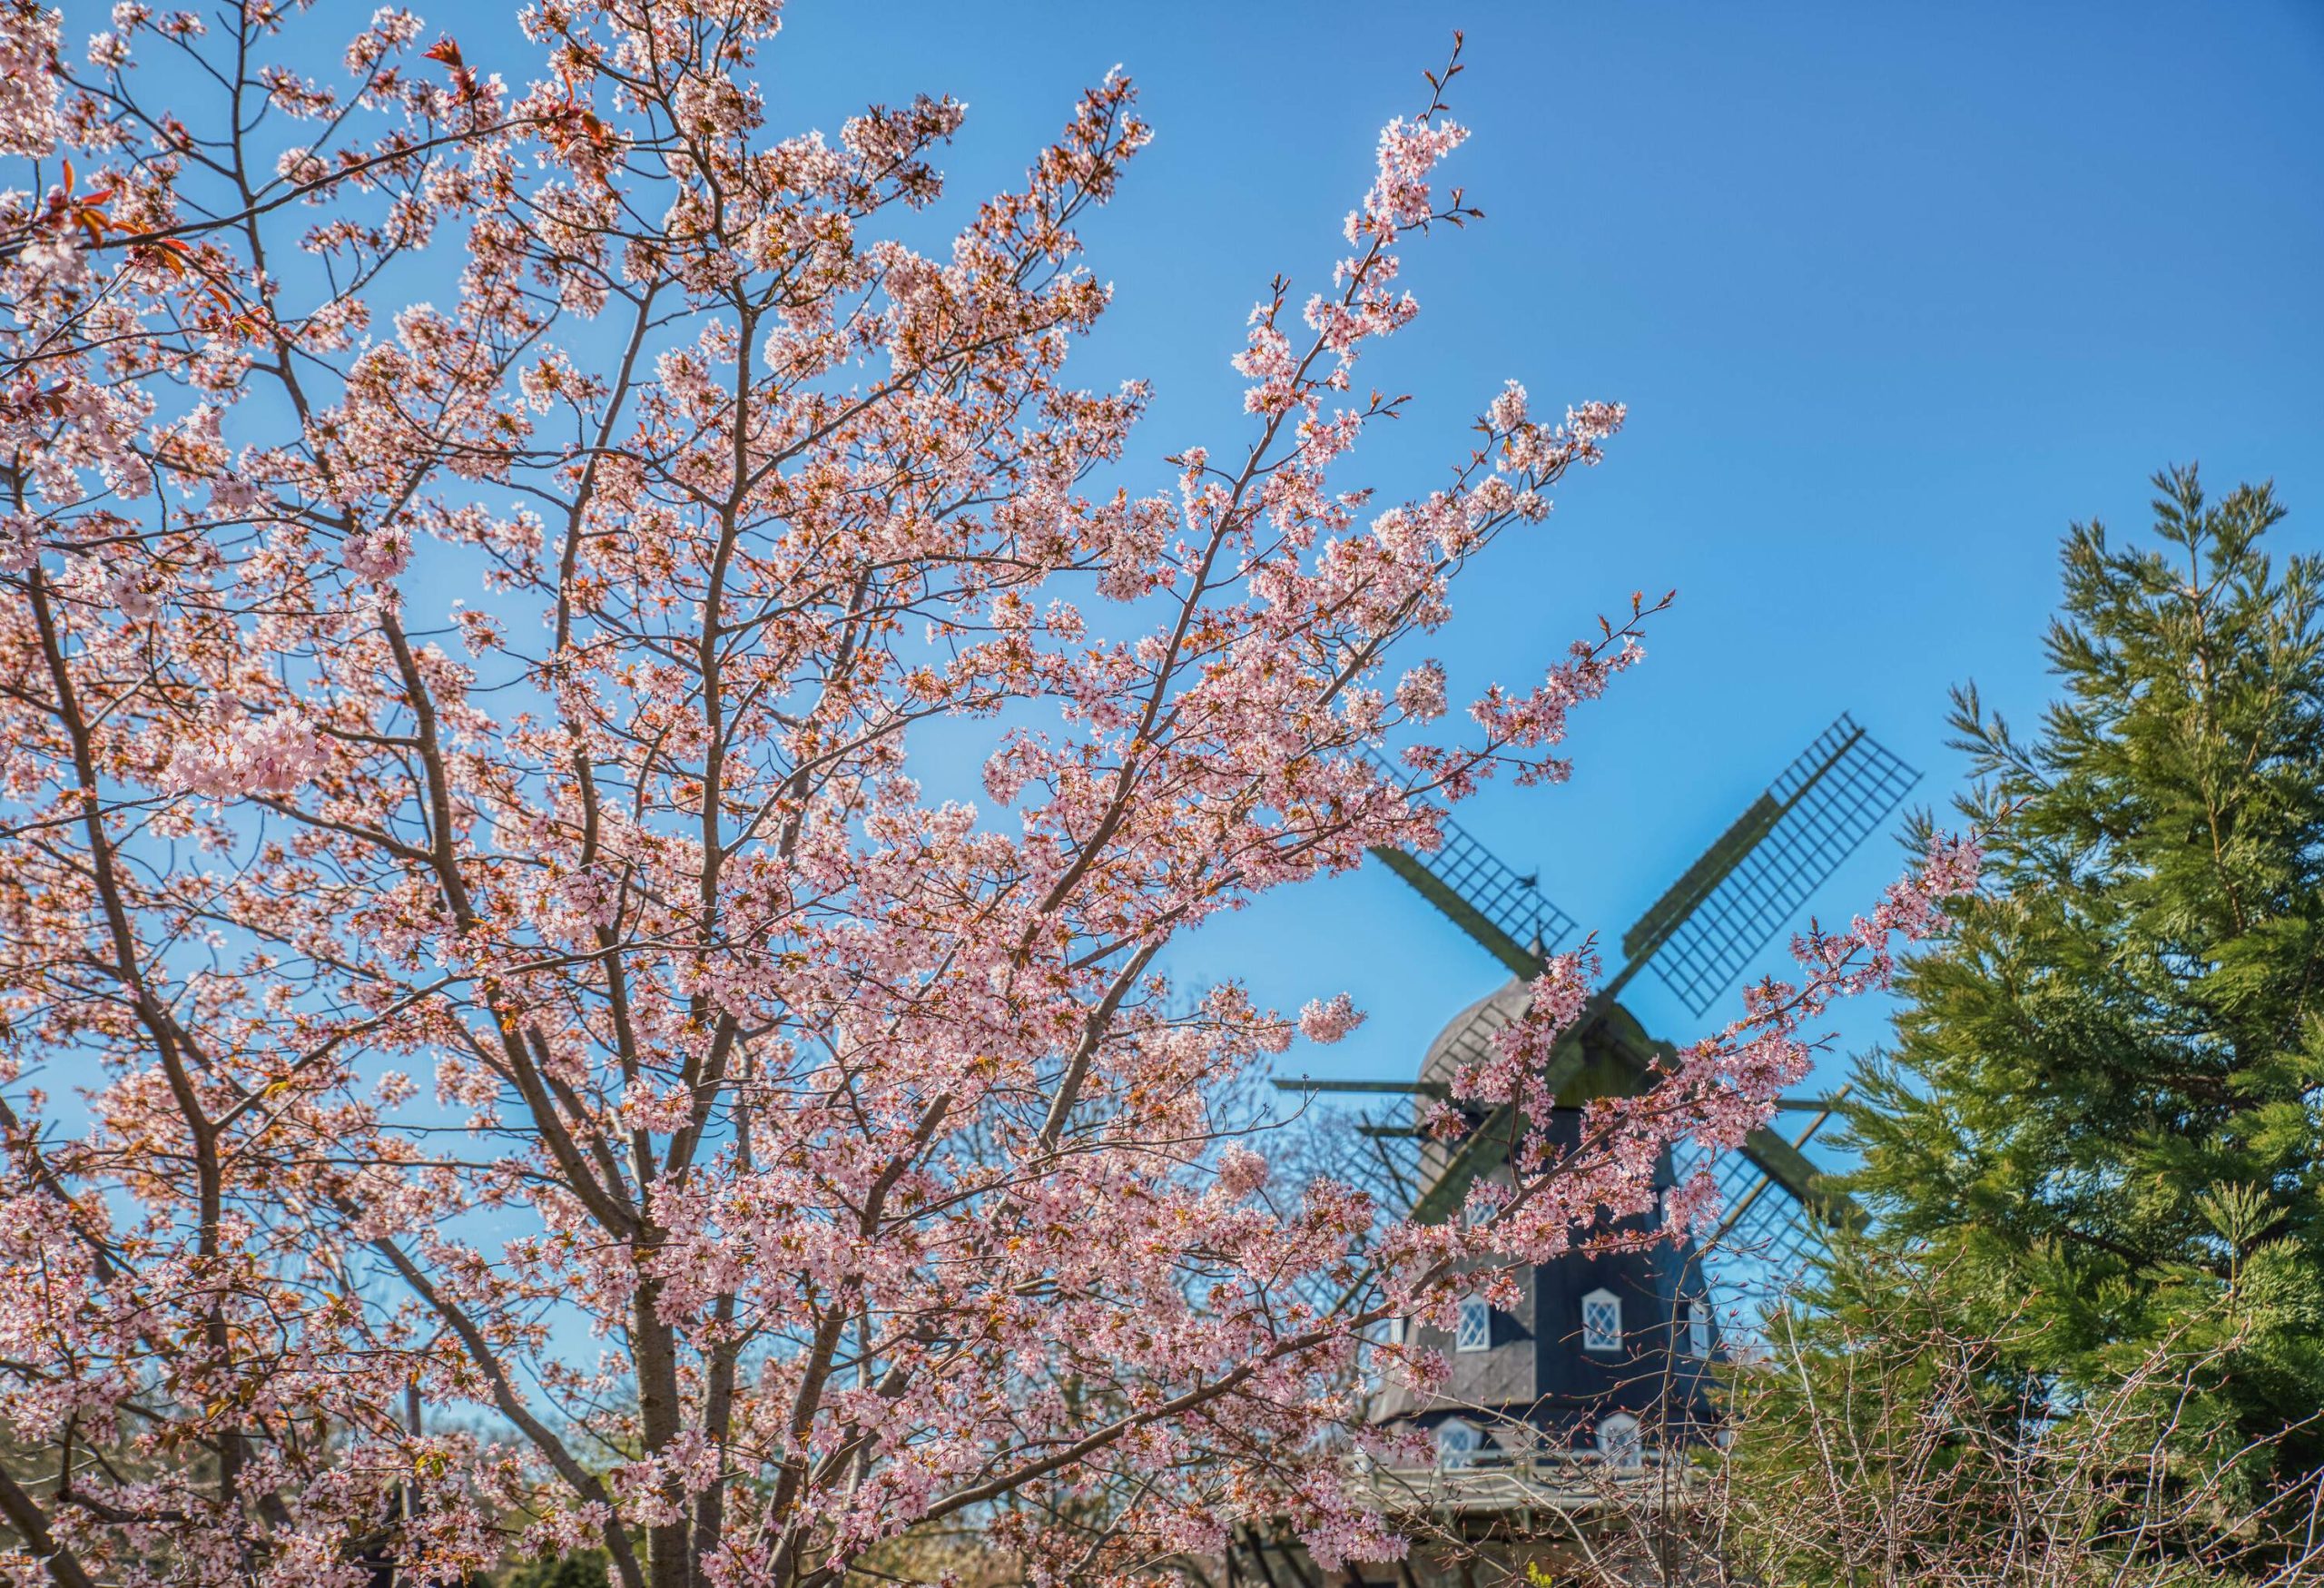 A blossoming cherry tree with an old windmill in the background.